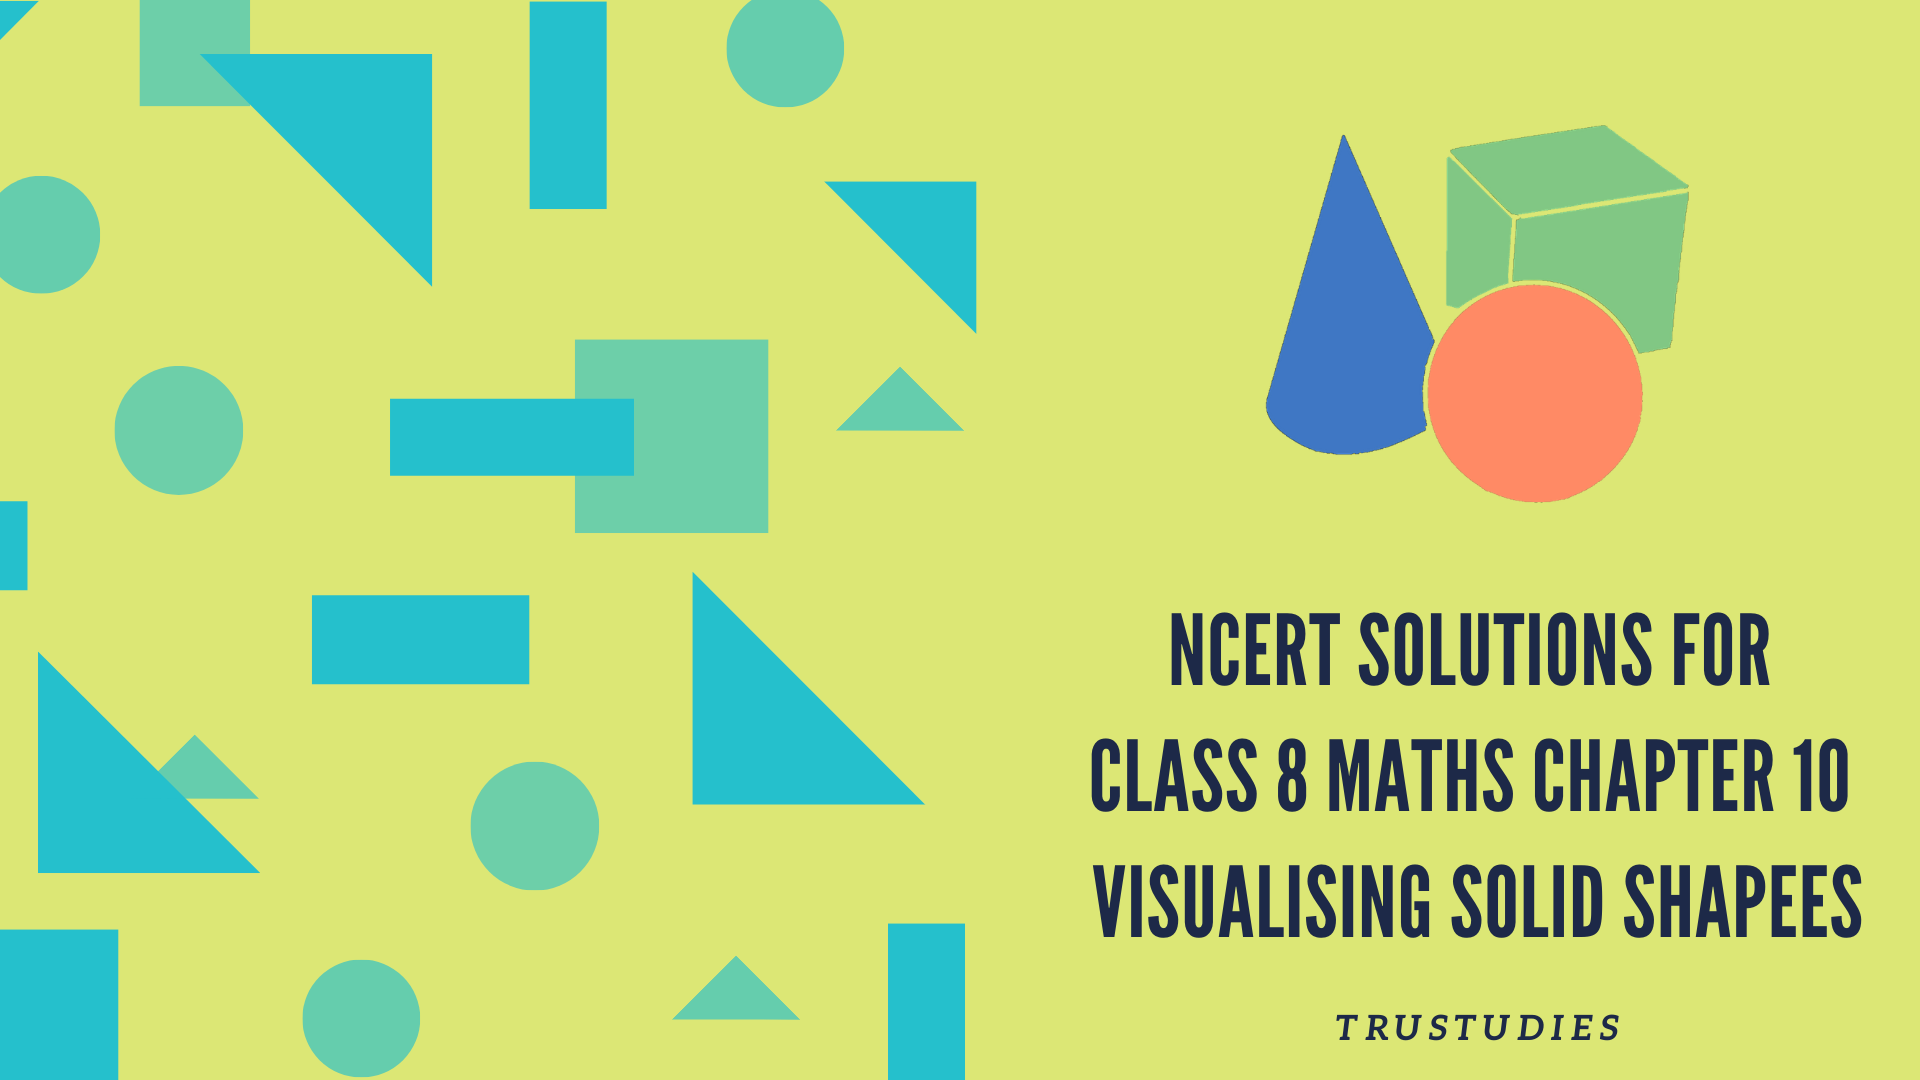 NCERT solutions for class 8 maths chapter 10 visualising solid shapes banner image